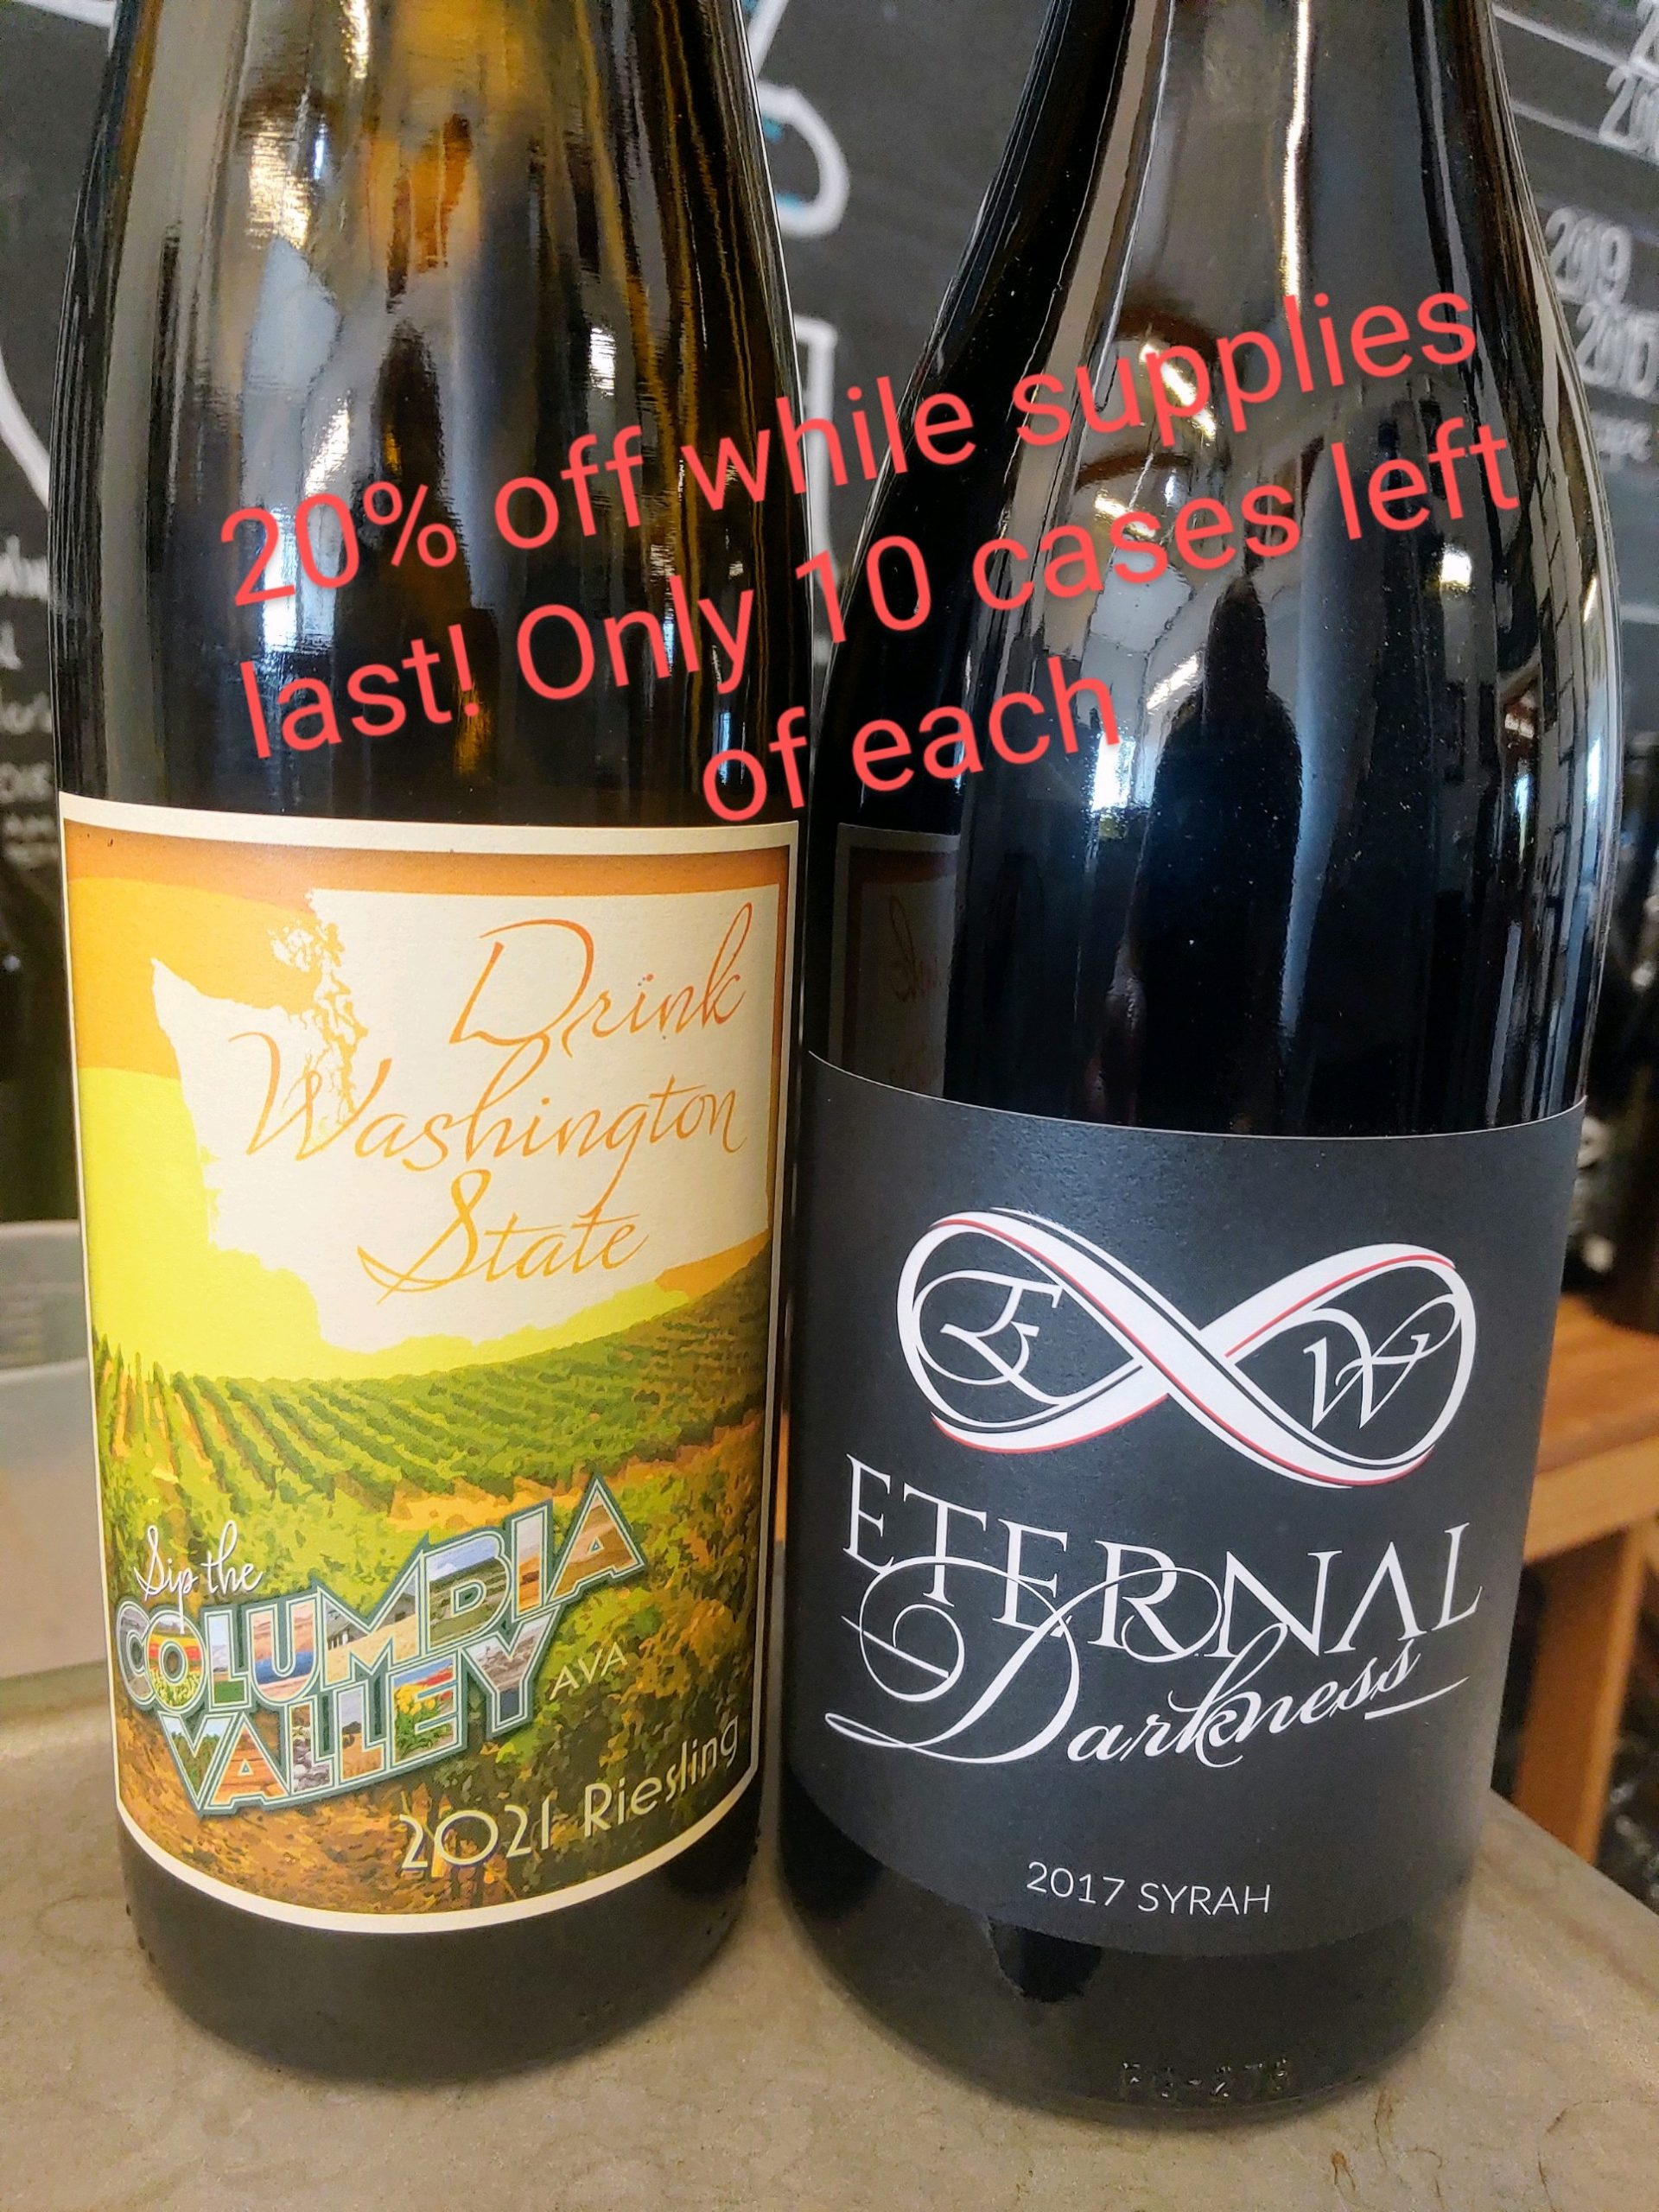 Eternal Darkness Halloween party, fall release concert, blowout on last cases of 2 wines